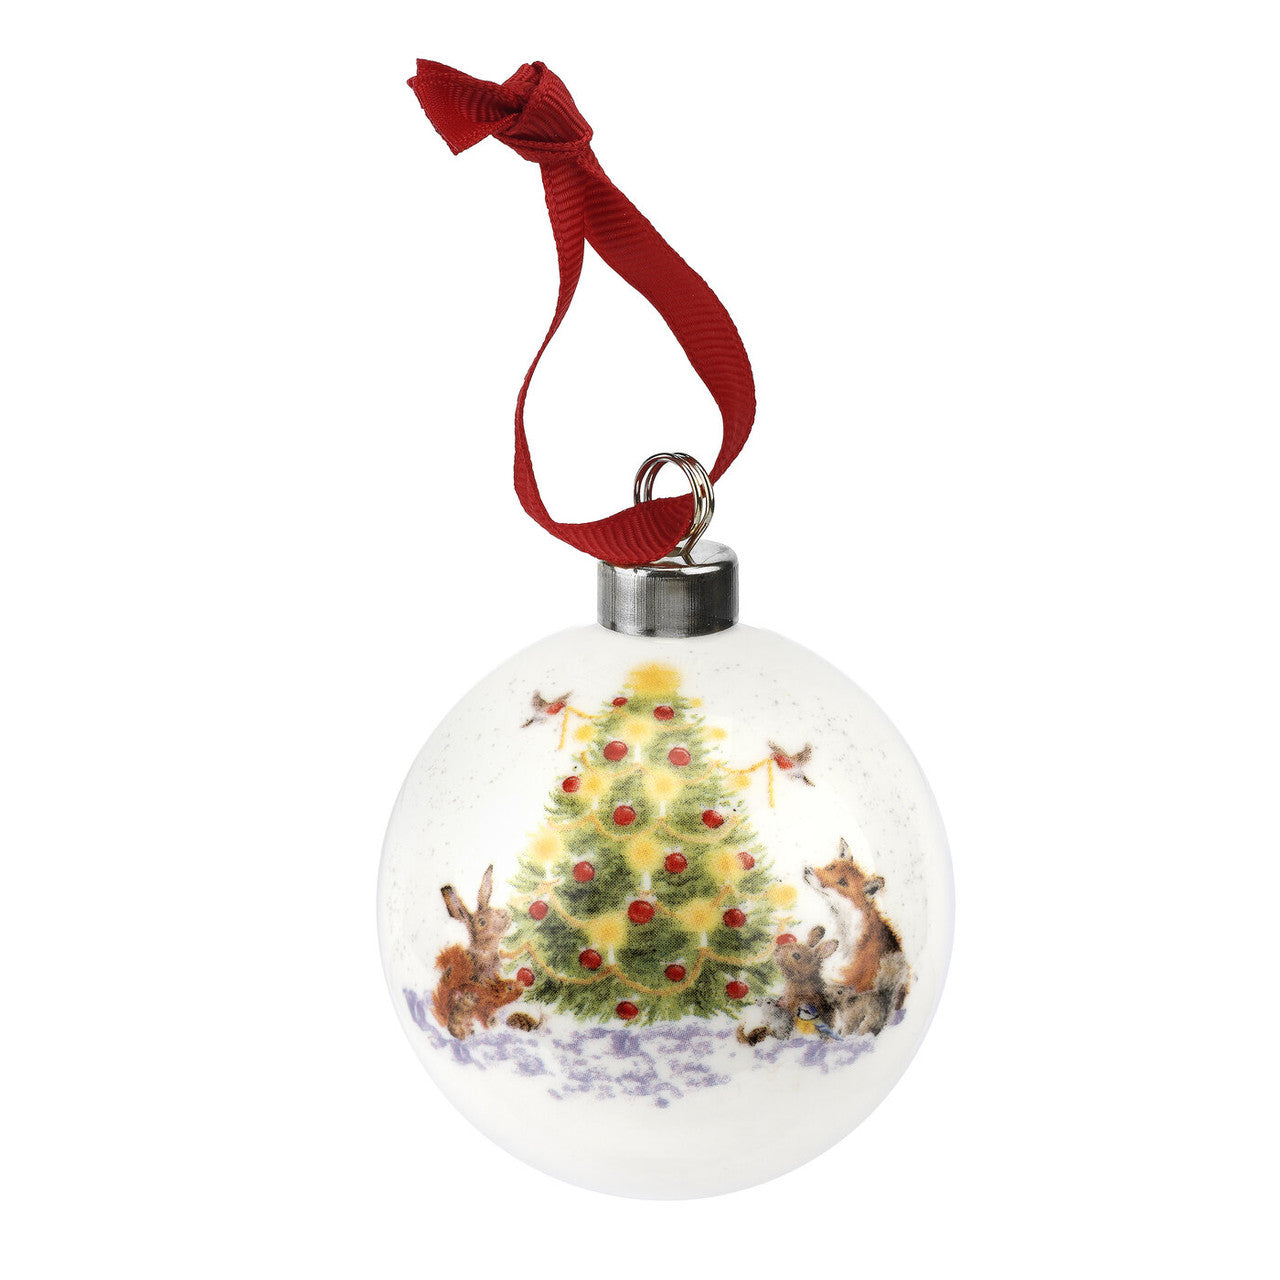 'Oh Christmas Tree' Fine Bone China rabbit bauble from Wrendale Designs and Portmeirion